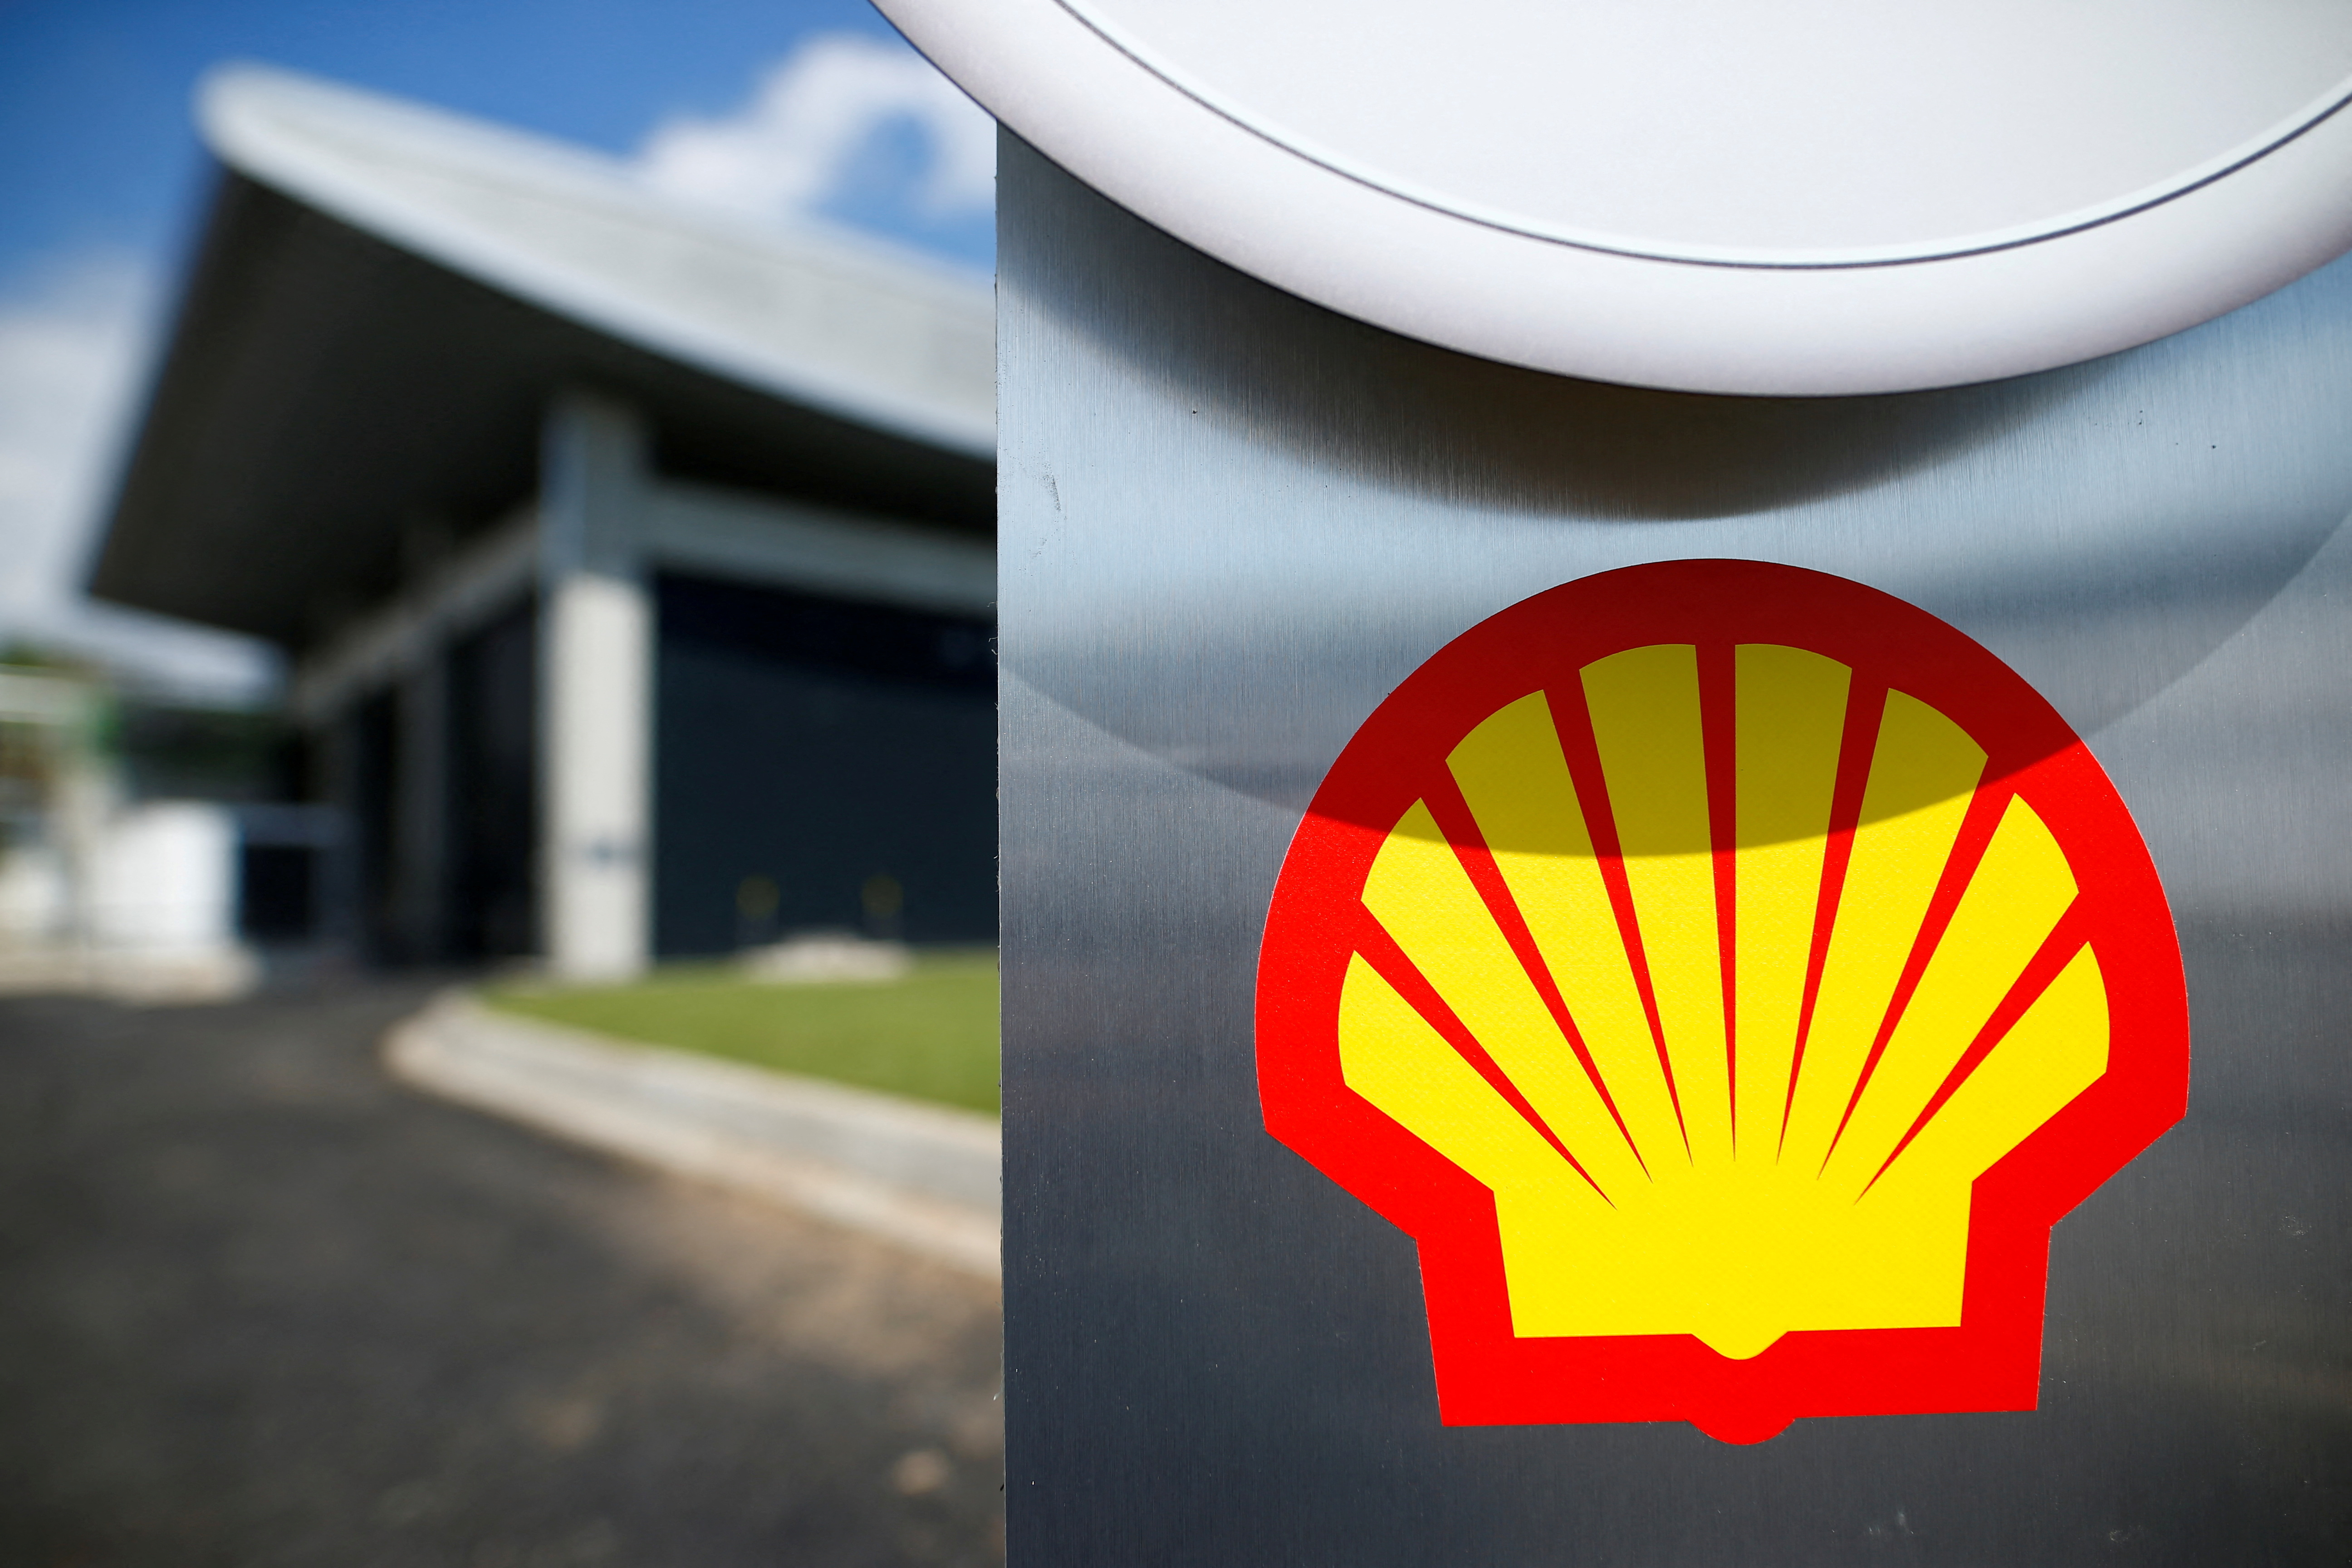 Energy company Shell's logo is pictured seen during a launch event for a hydrogen electrolysis plant at its Rhineland refinery in Germany